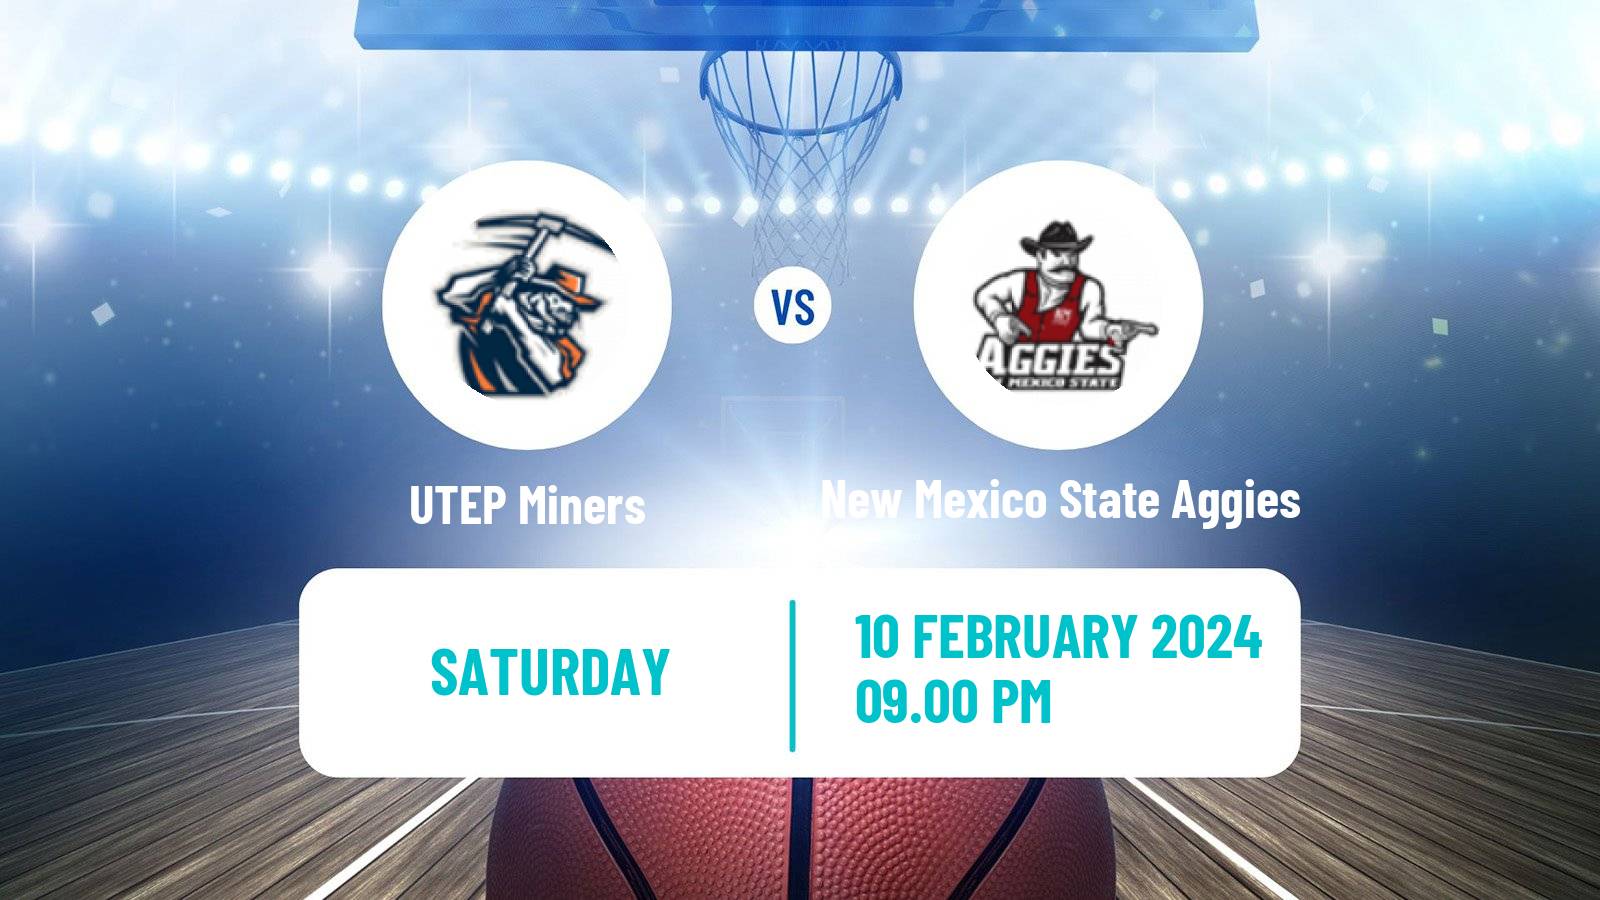 Basketball NCAA College Basketball UTEP Miners - New Mexico State Aggies